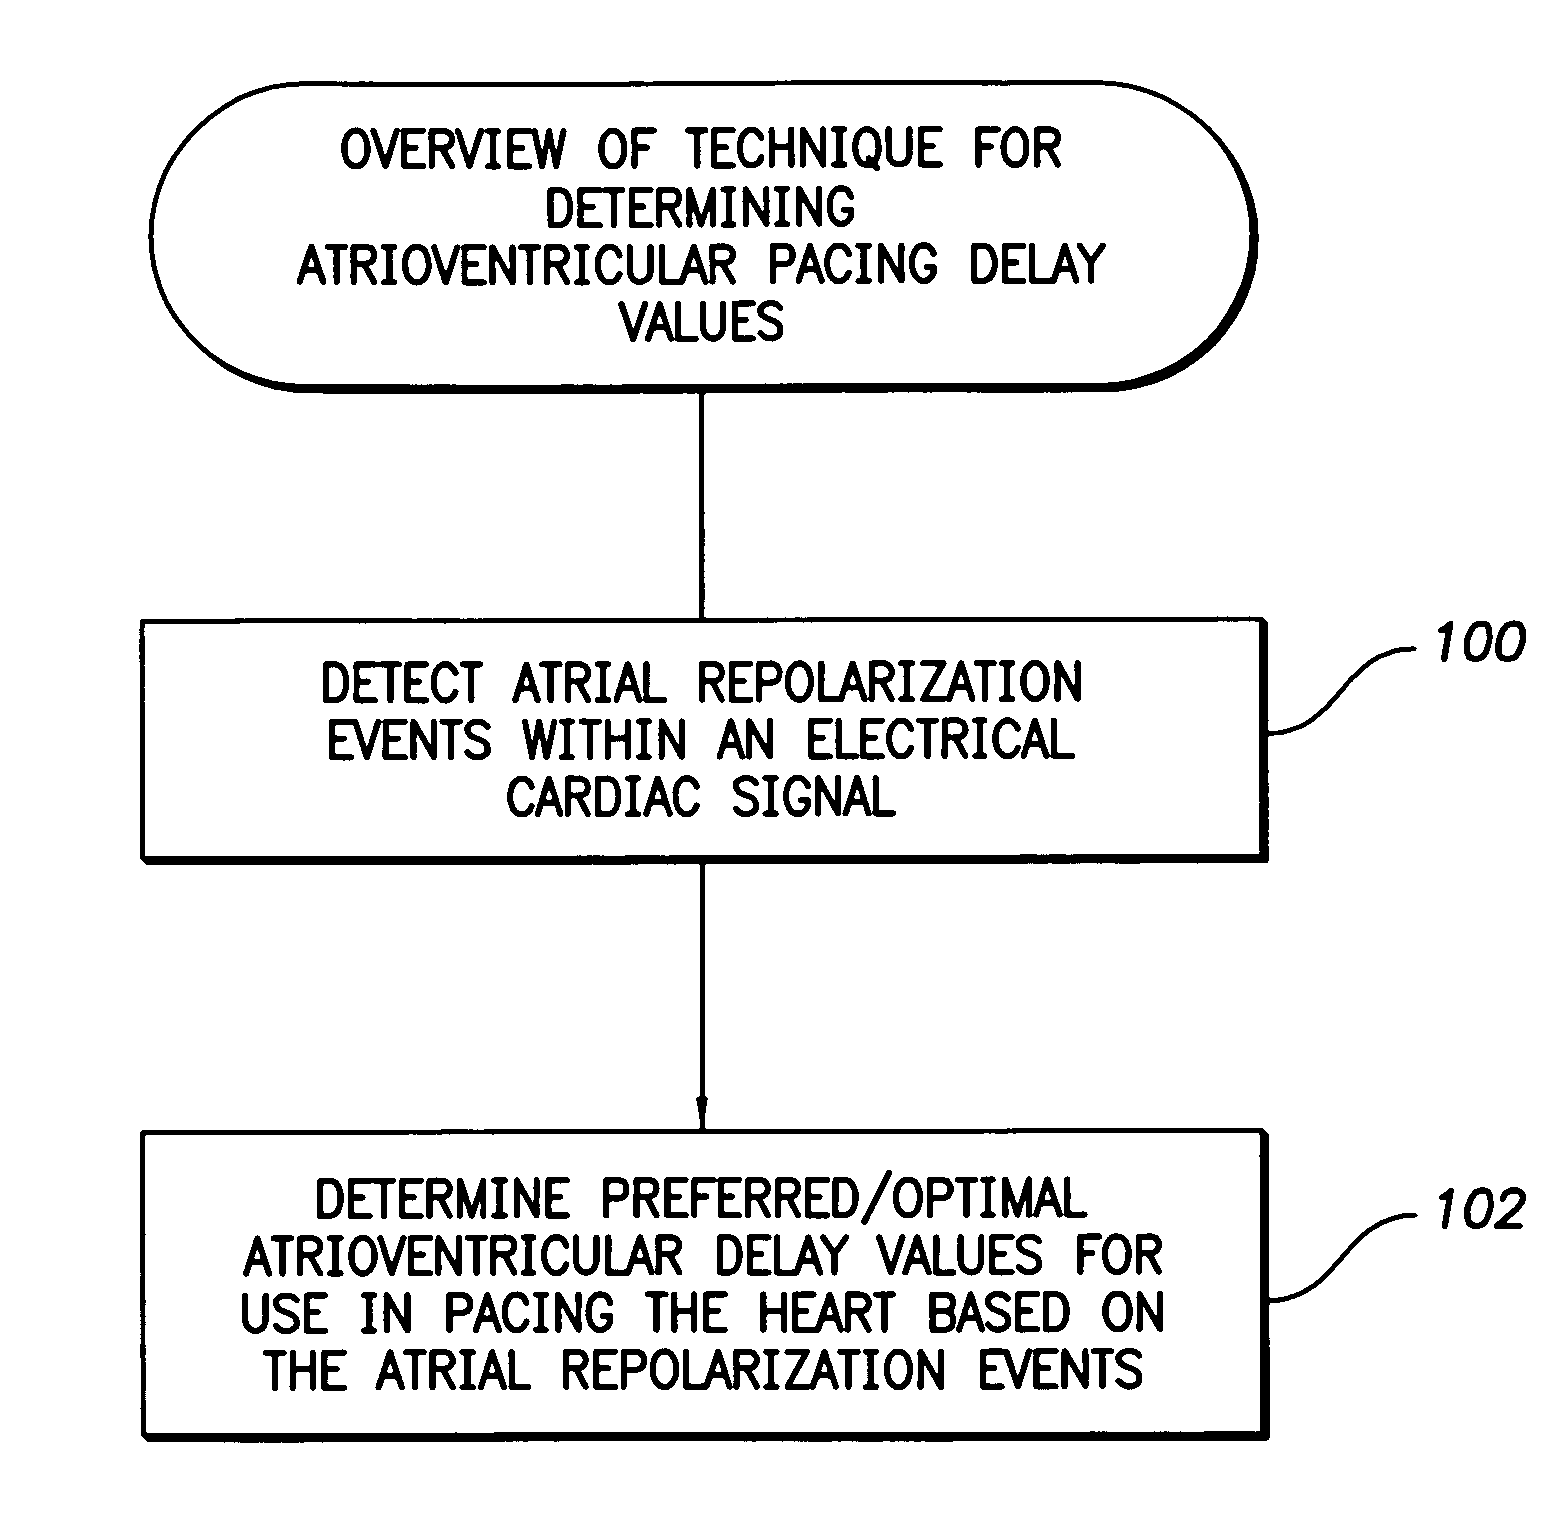 System and method for determining atrioventricular pacing delay based on atrial depolarization